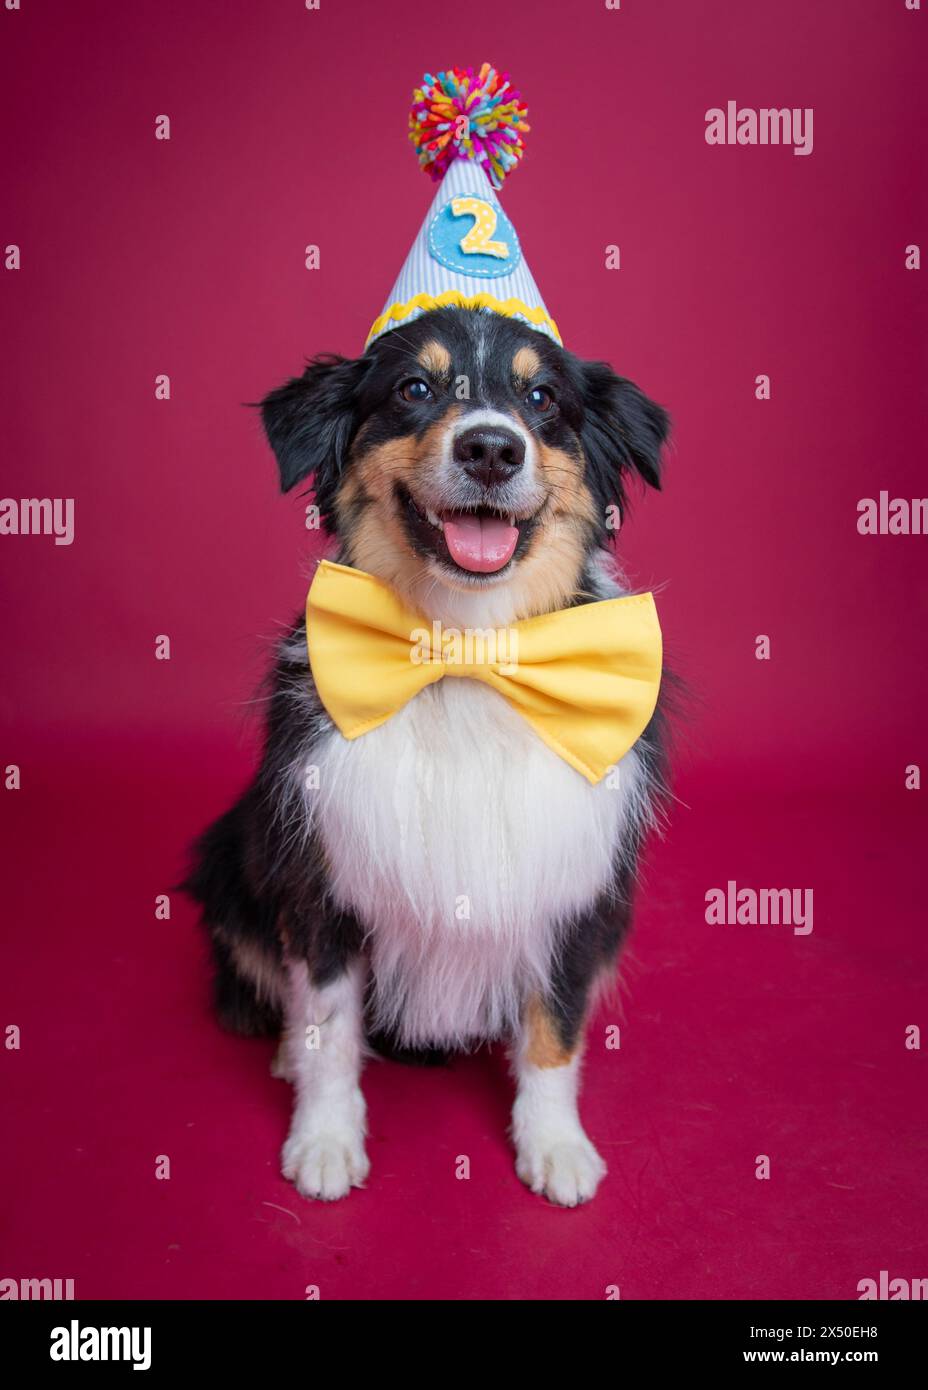 Portrait of a happy Black tricolored Australian Shepherd wearing a birthday party hat and bow tie Stock Photo